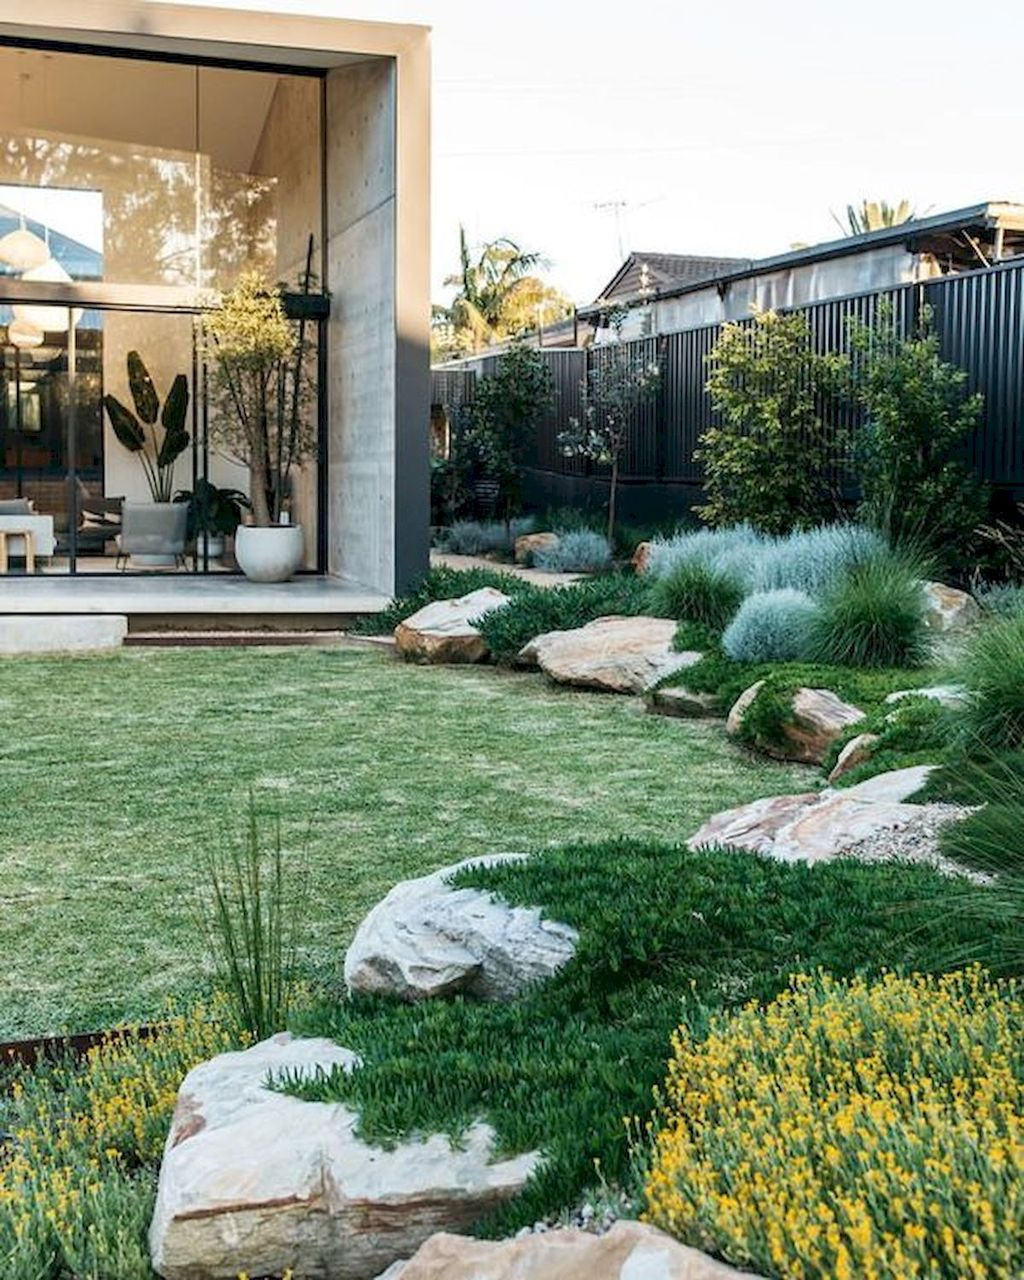 Outstanding Garden Design Ideas With Best Style To Try26